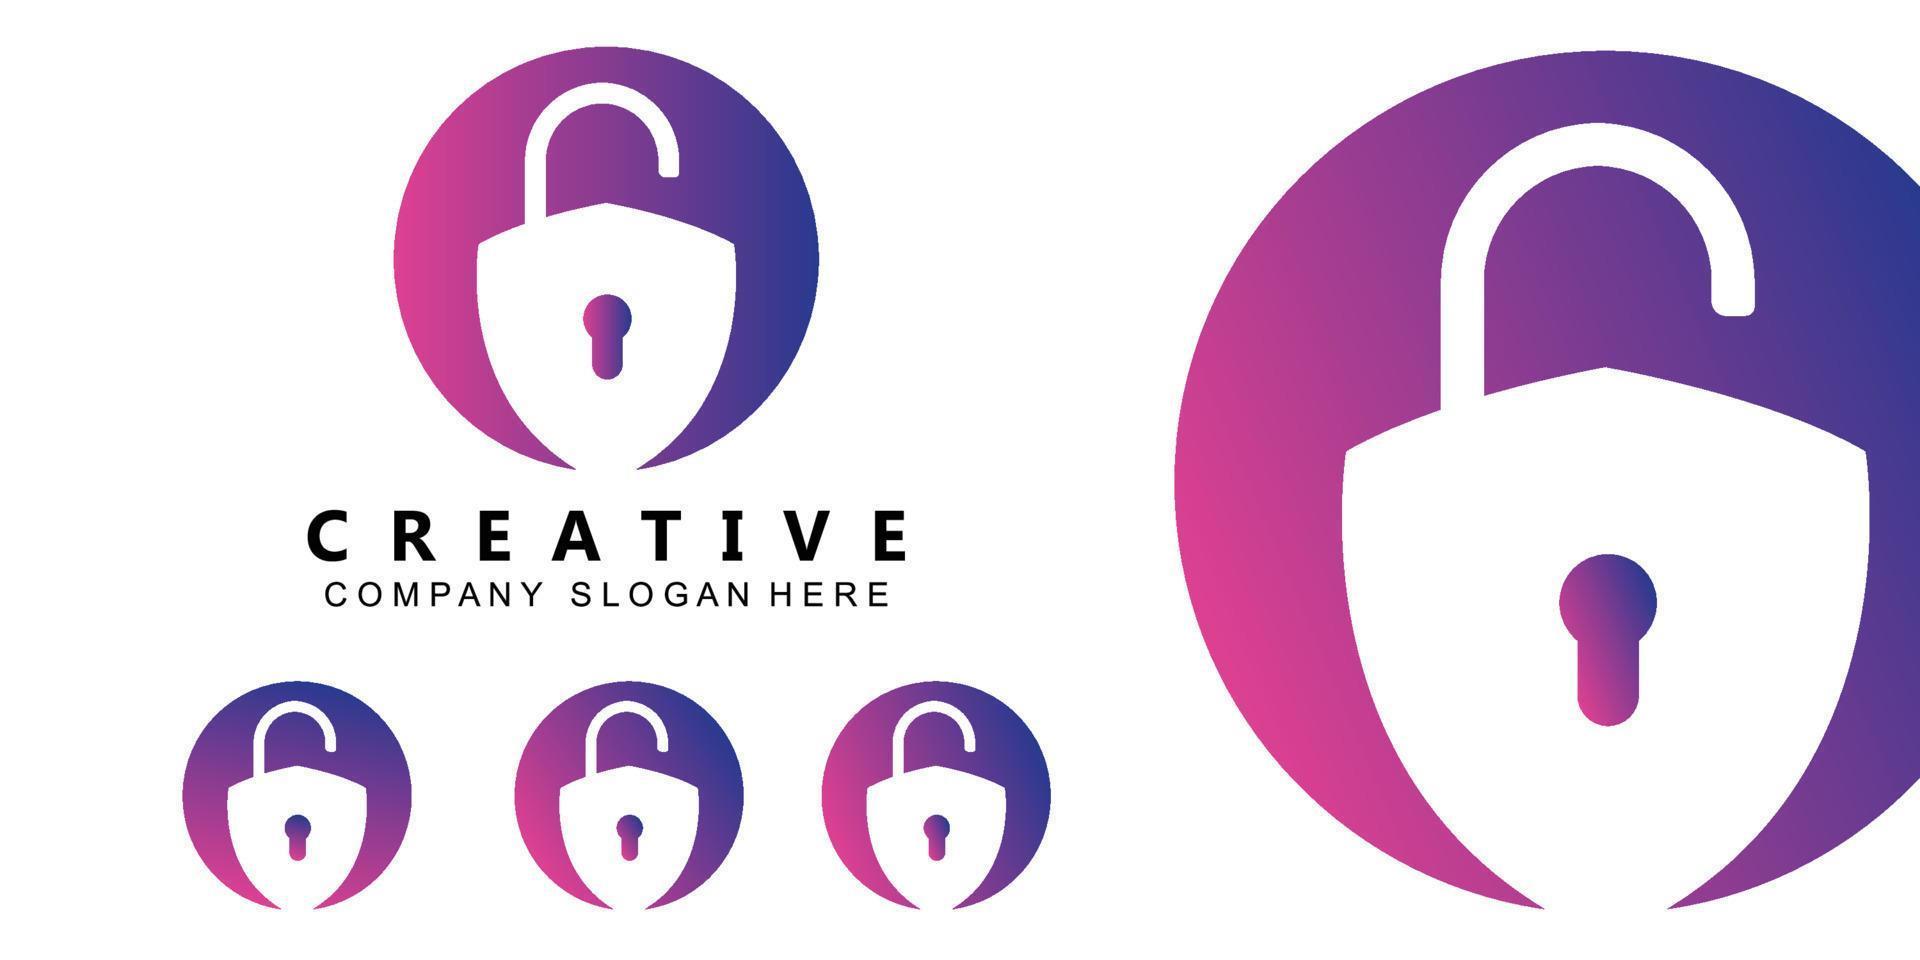 home and site security padlock logo vector symbol